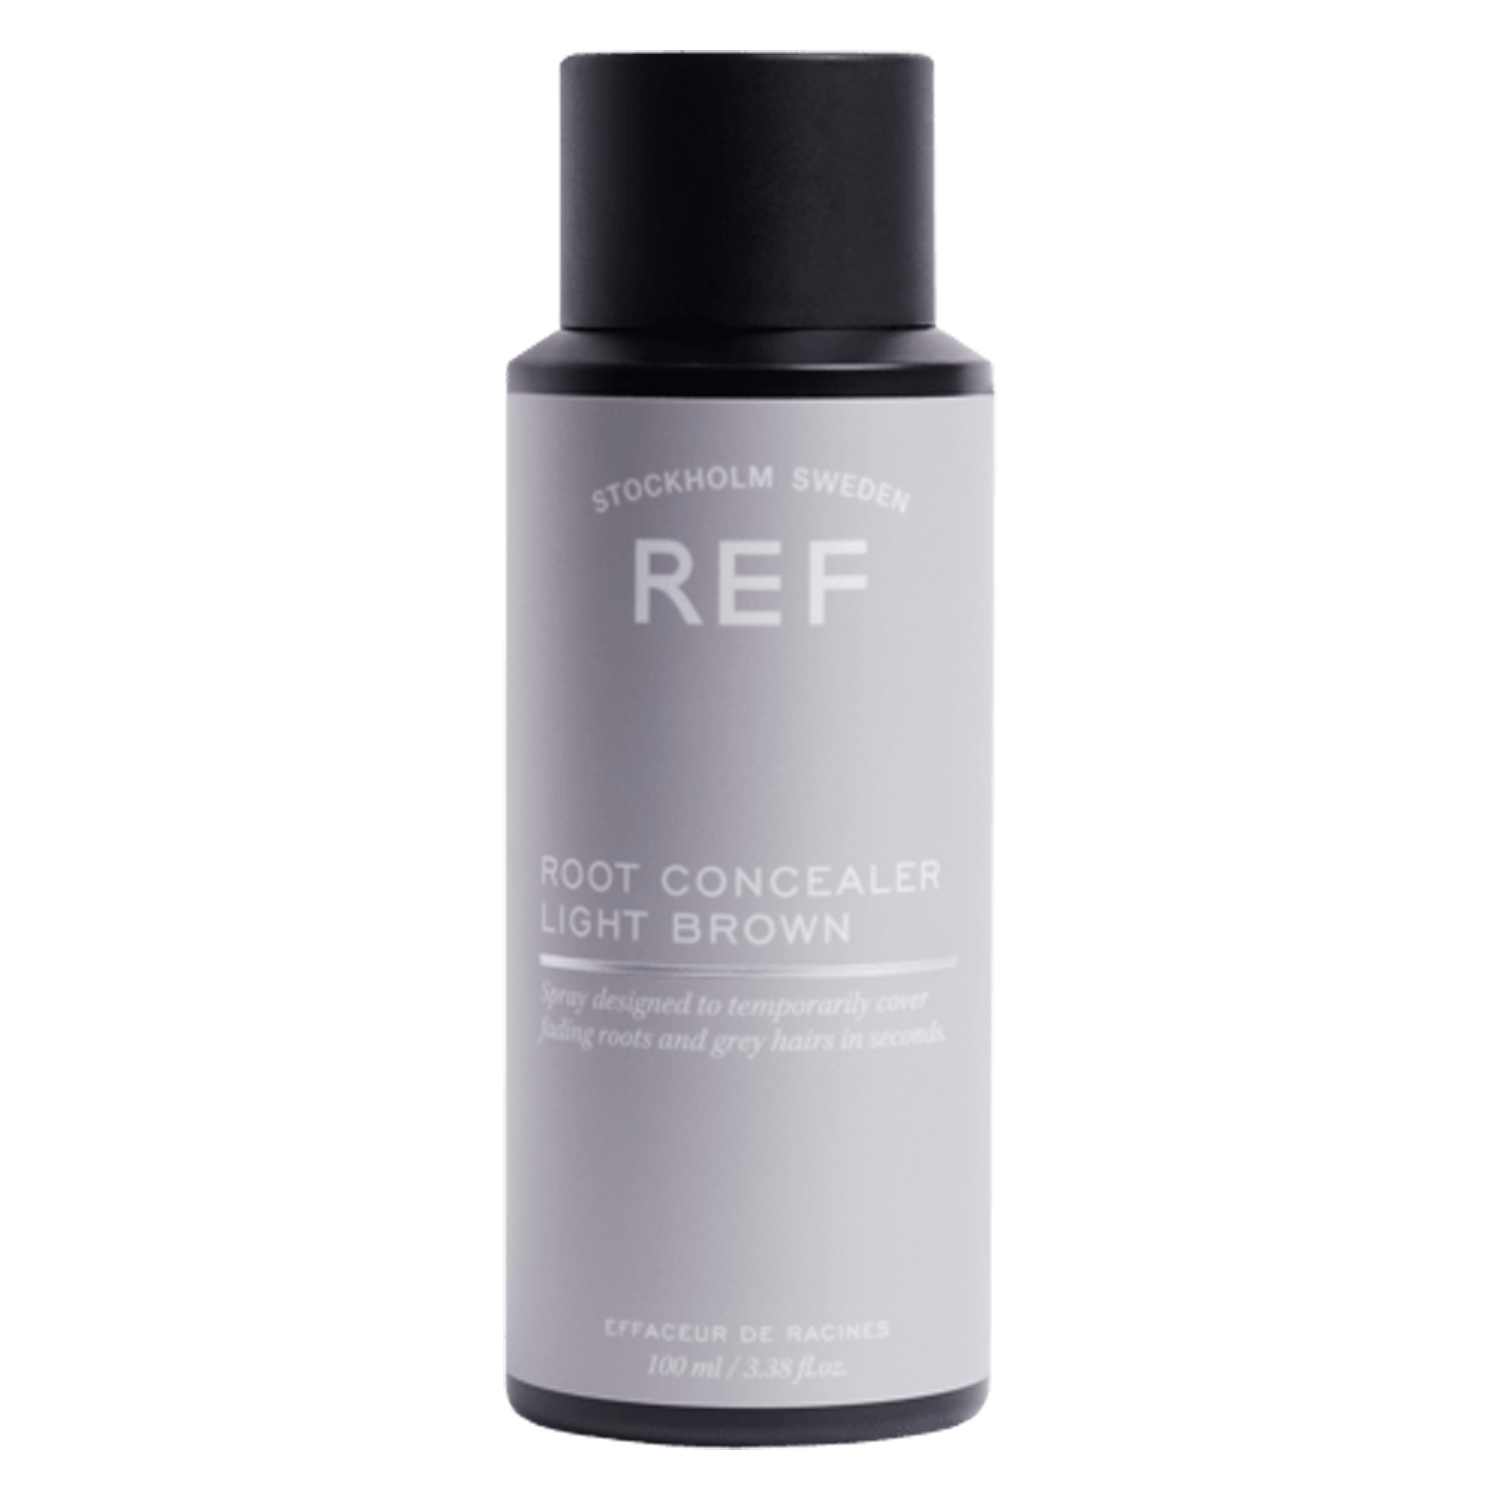 Product image from REF Styling - Root Concealer Light Brown